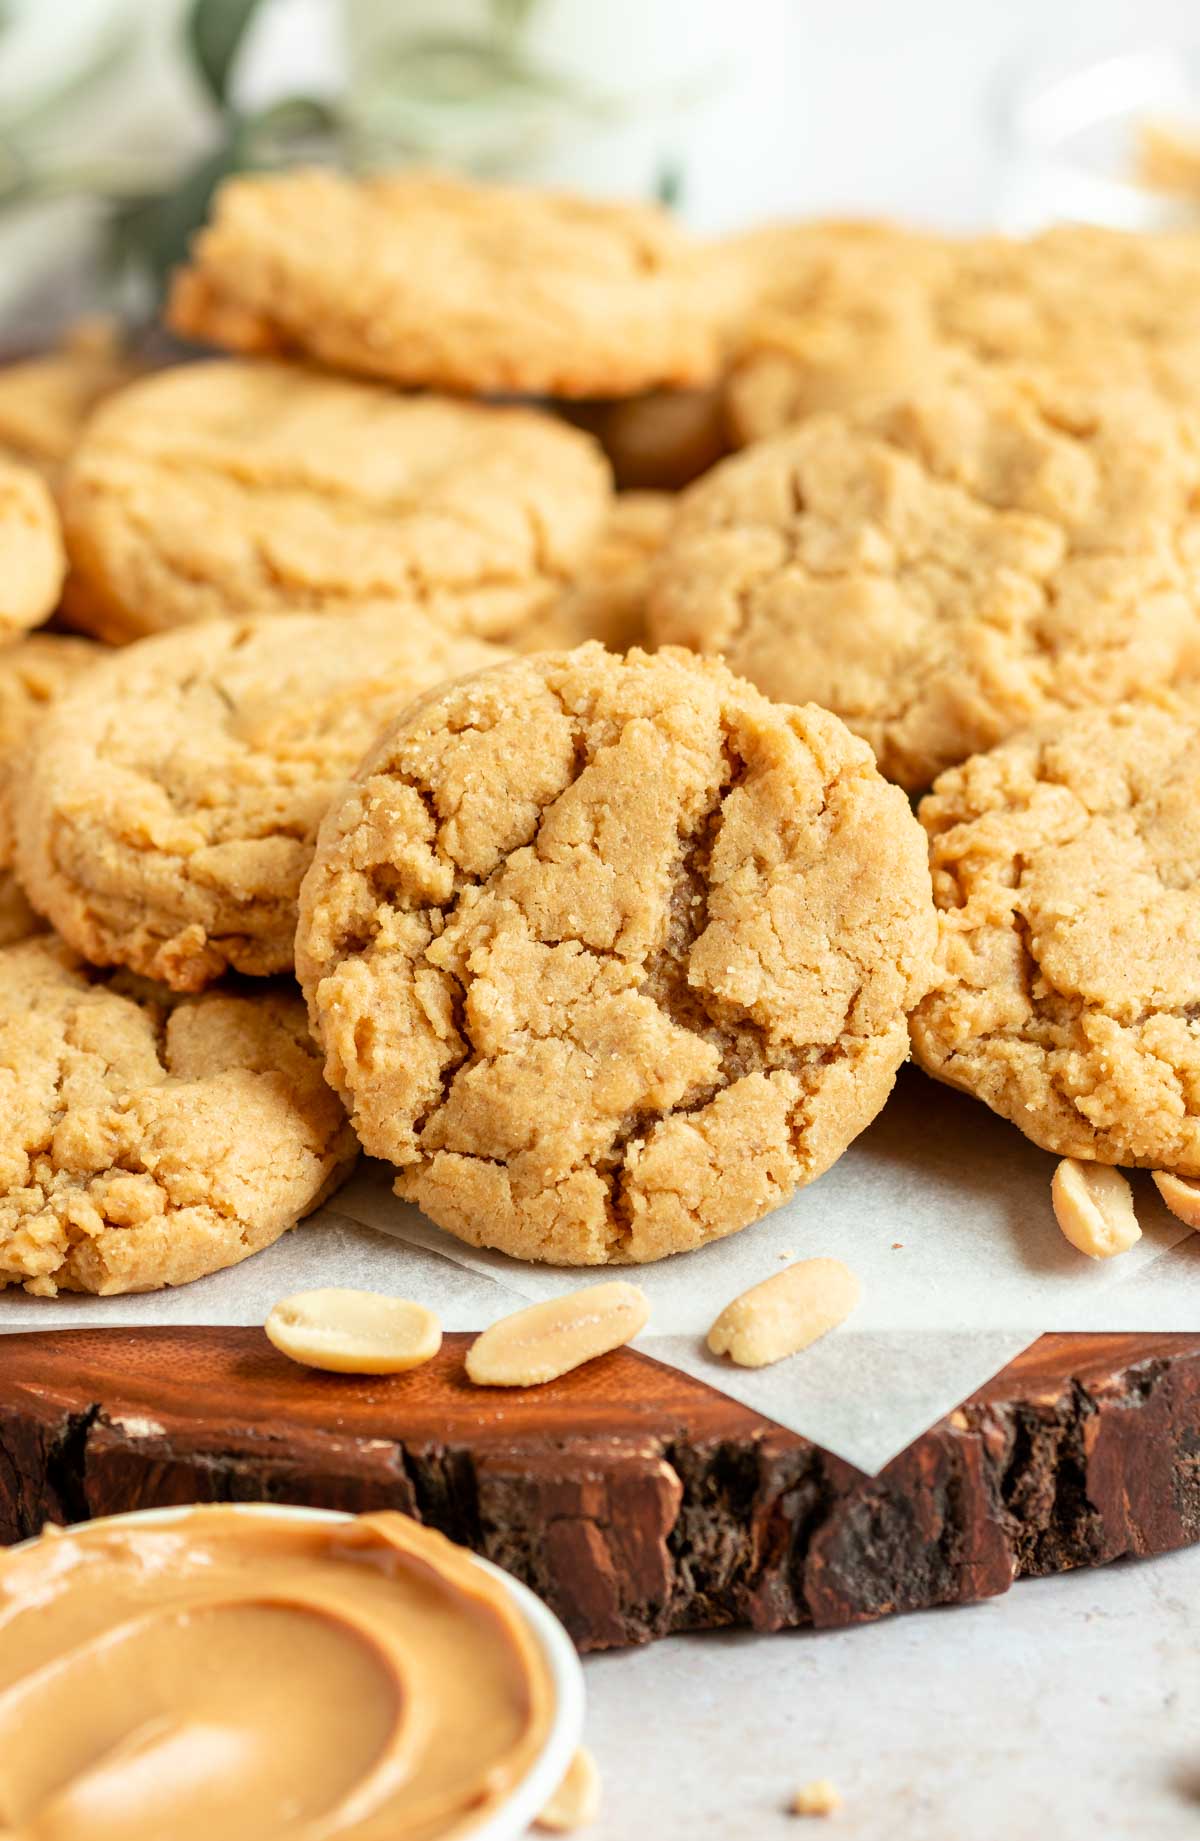 Chewy peanut butter cookies on a parchment paper.